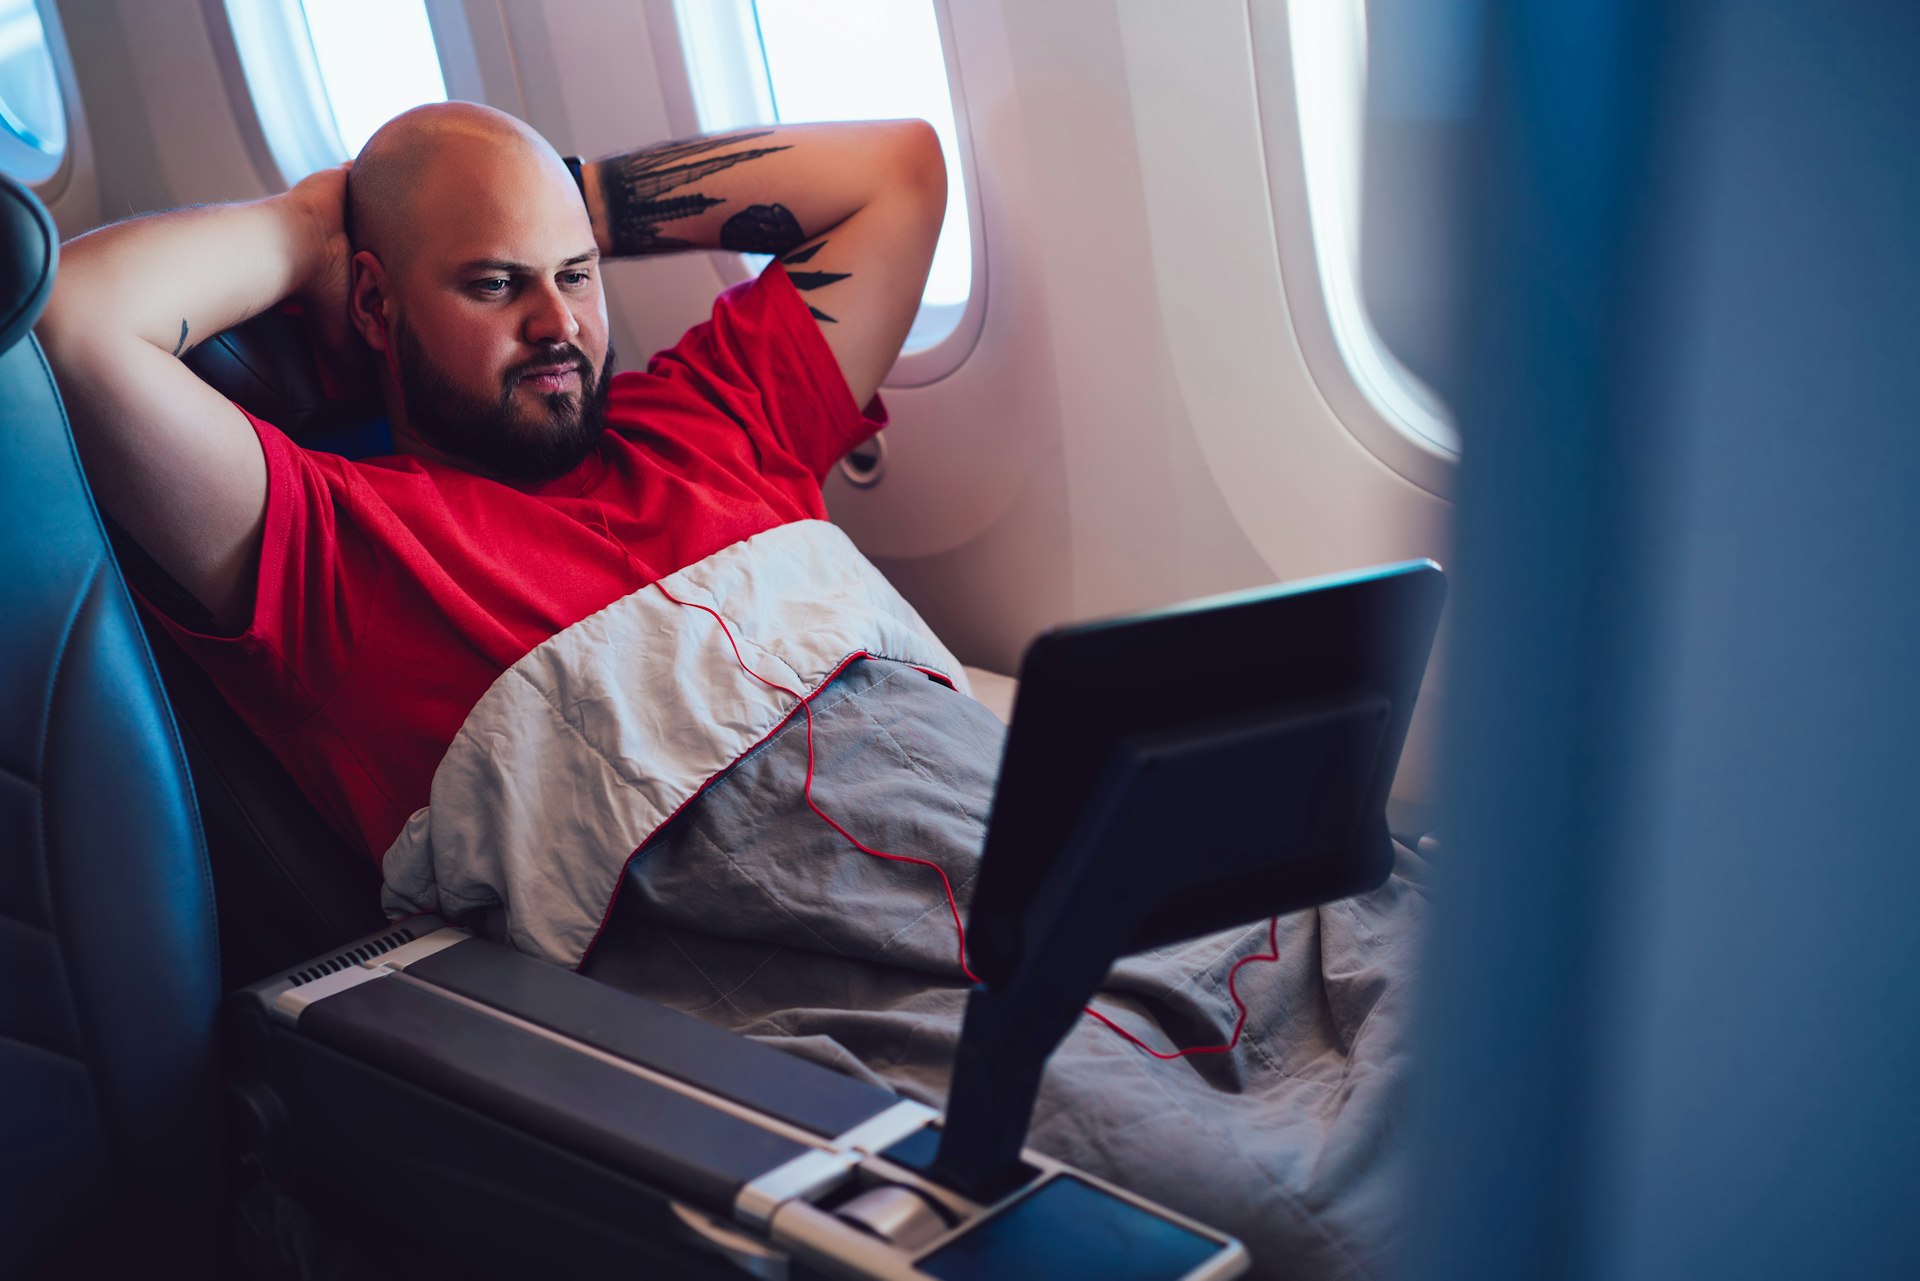 Man reclining his seat in an airplane